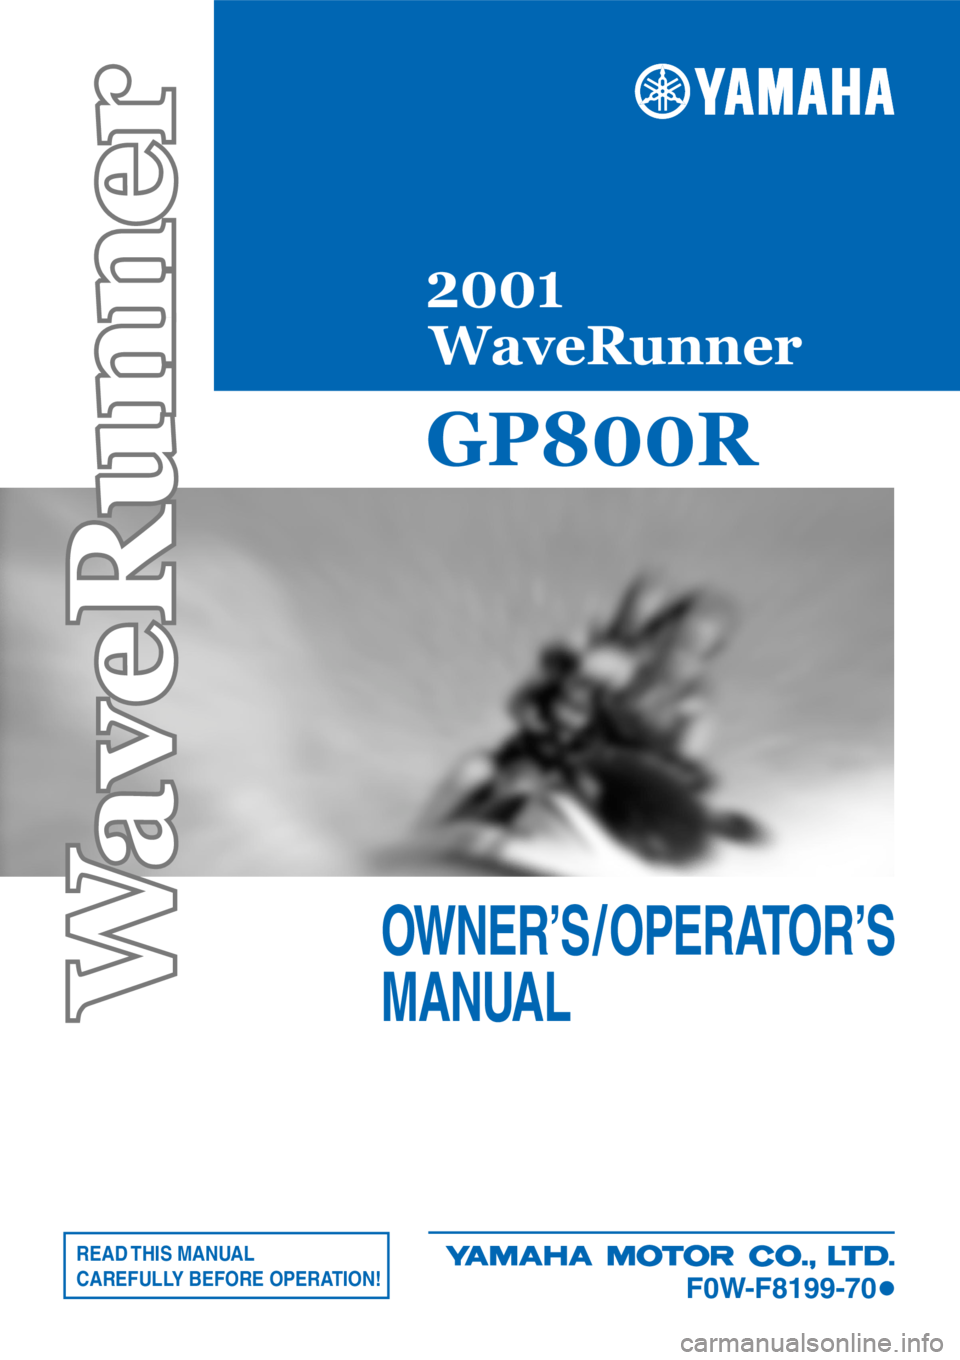 YAMAHA GP800R 2021  Owners Manual READ THIS  MANUAL
CAREFULLY BEFORE OPERATION!
OWNER’S / OPERATOR’S
MANUAL
F0W-F8199-70
GP800R
2001
WaveRunner 